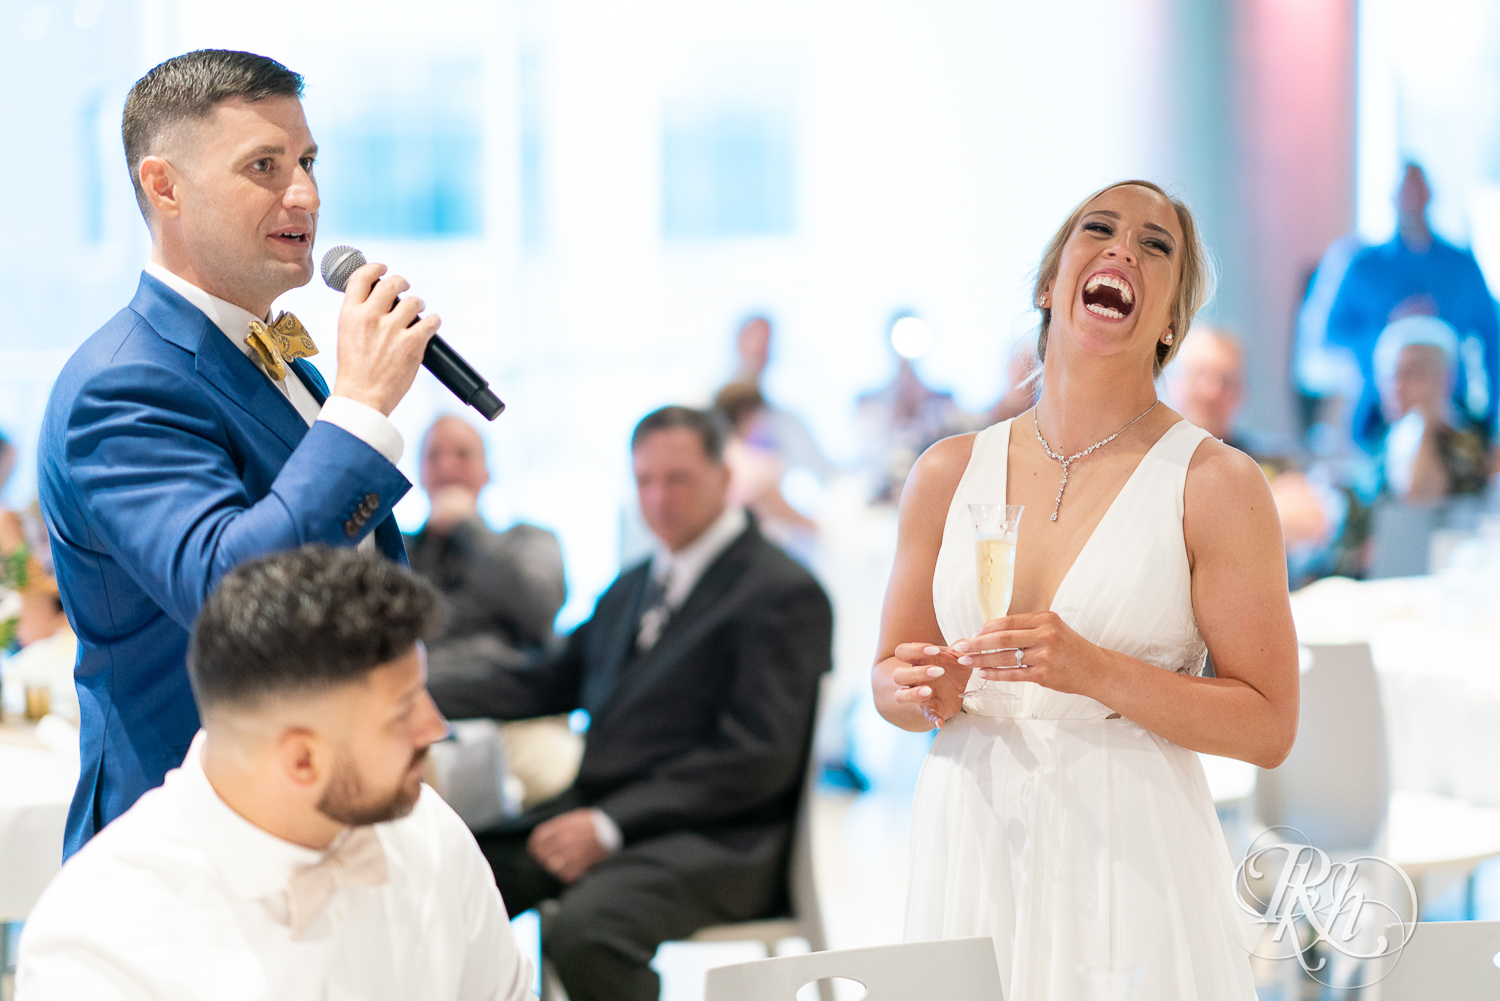 Bride and groom toast during wedding reception at Saint Paul Event Center in Saint Paul, Minnesota.